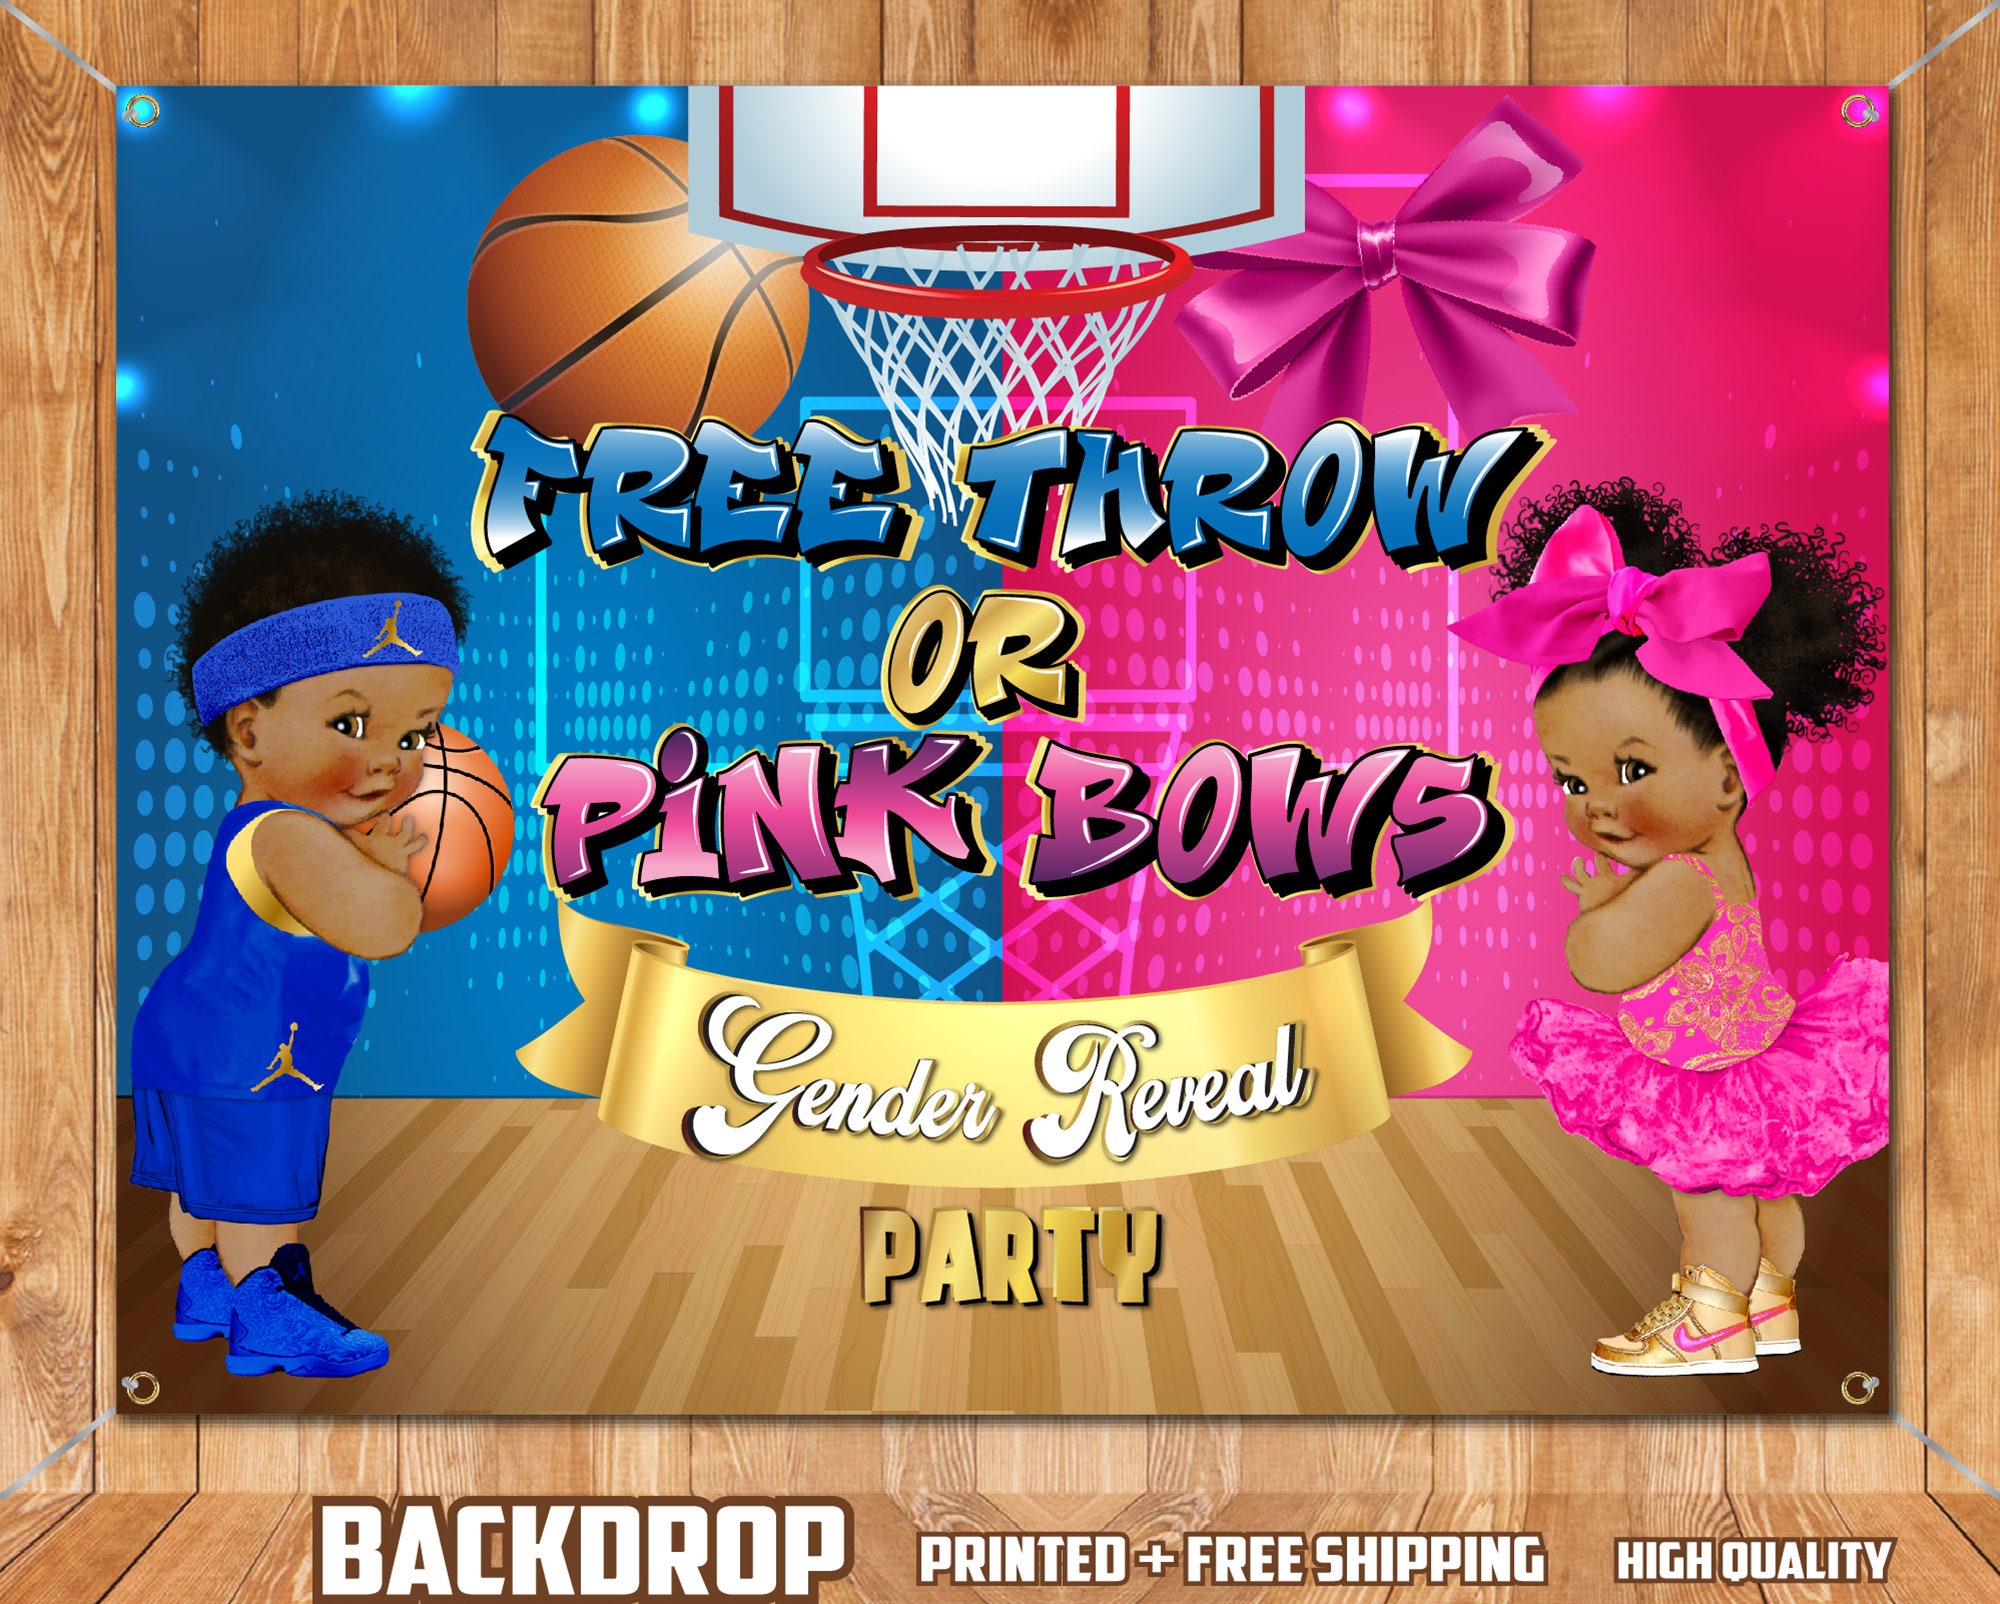 Allenjoy Gender Reveal Free Throws or Pink Bows Backdrop